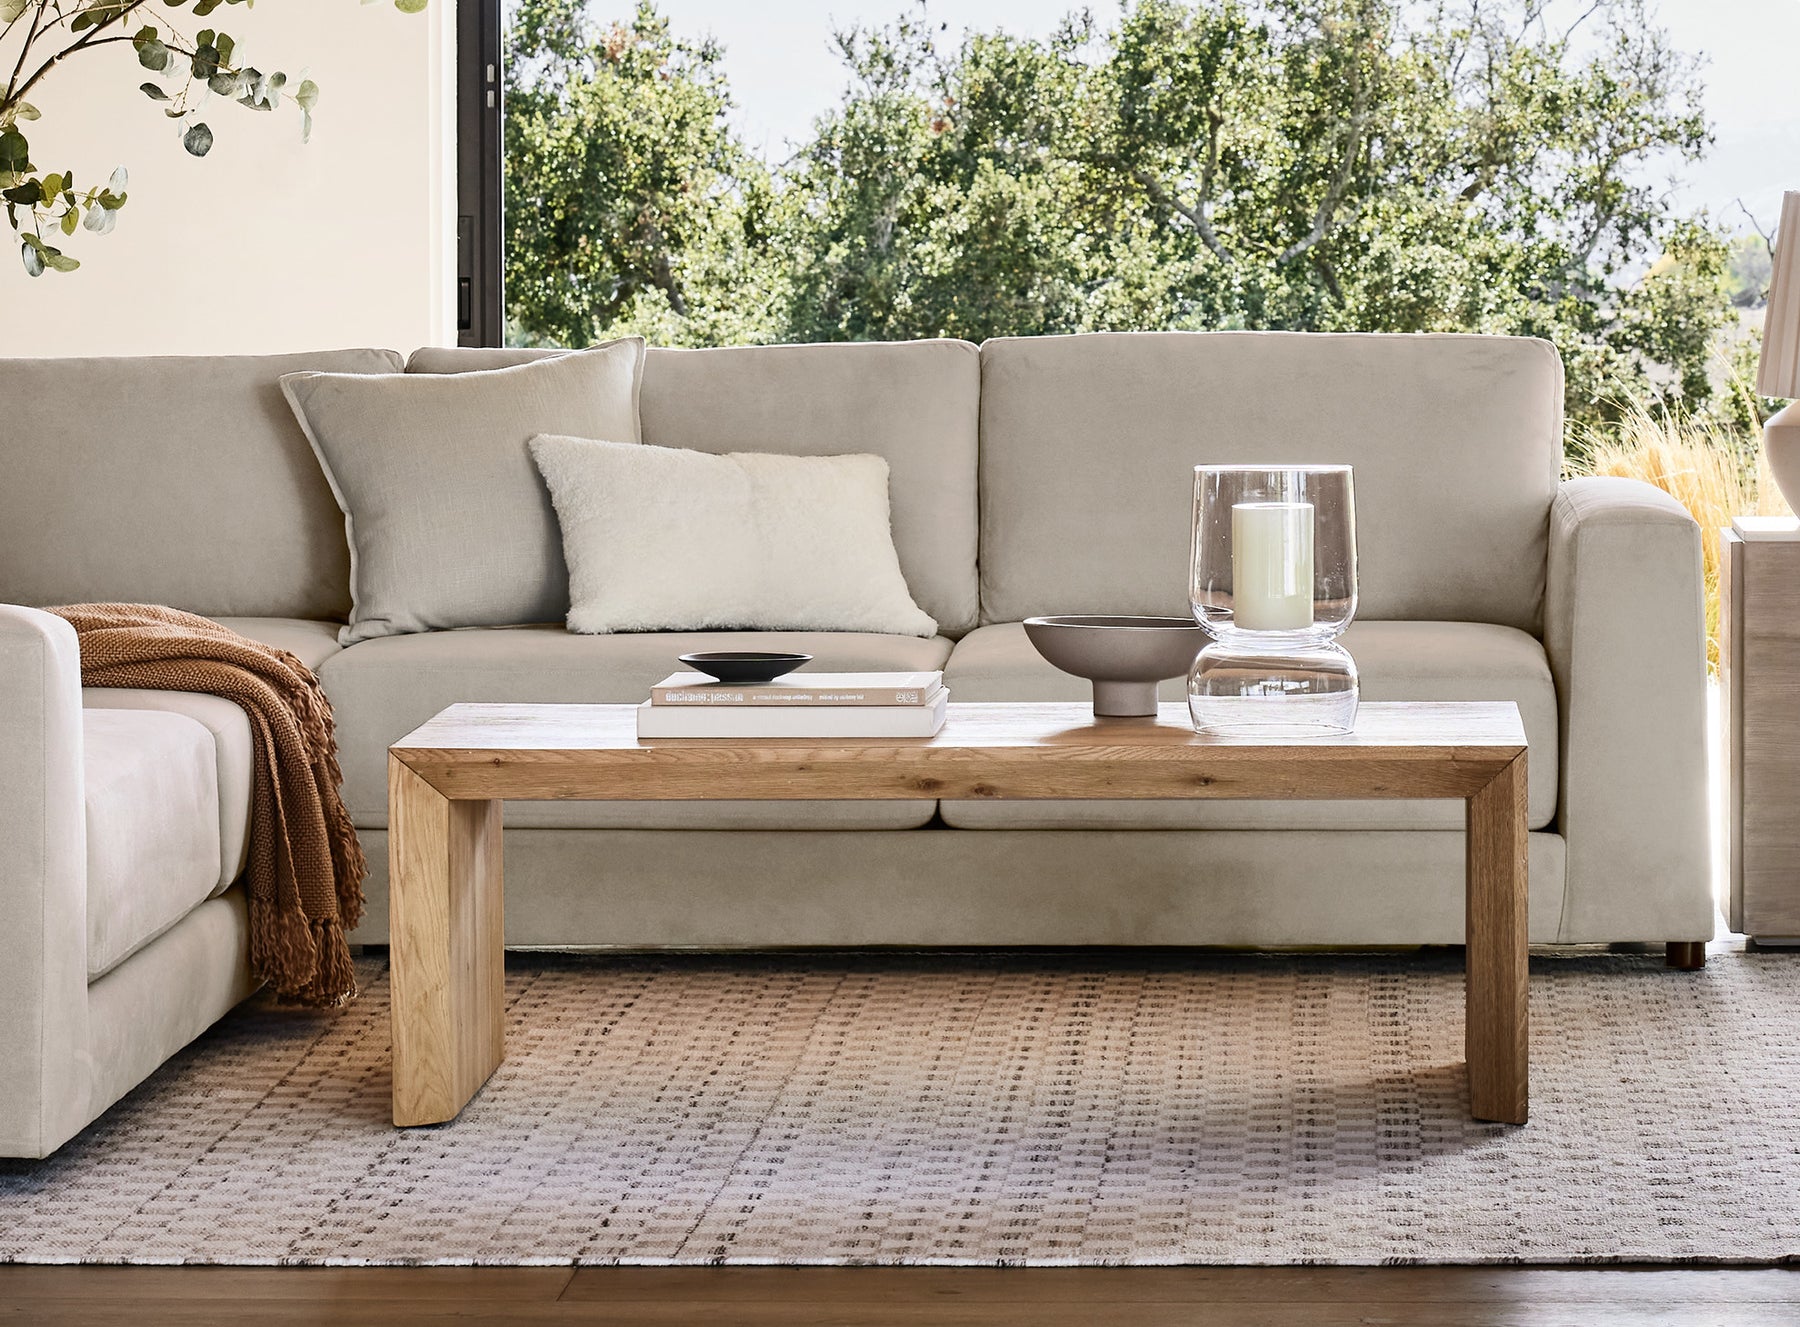 How to Choose a Coffee Table for Your Living Space